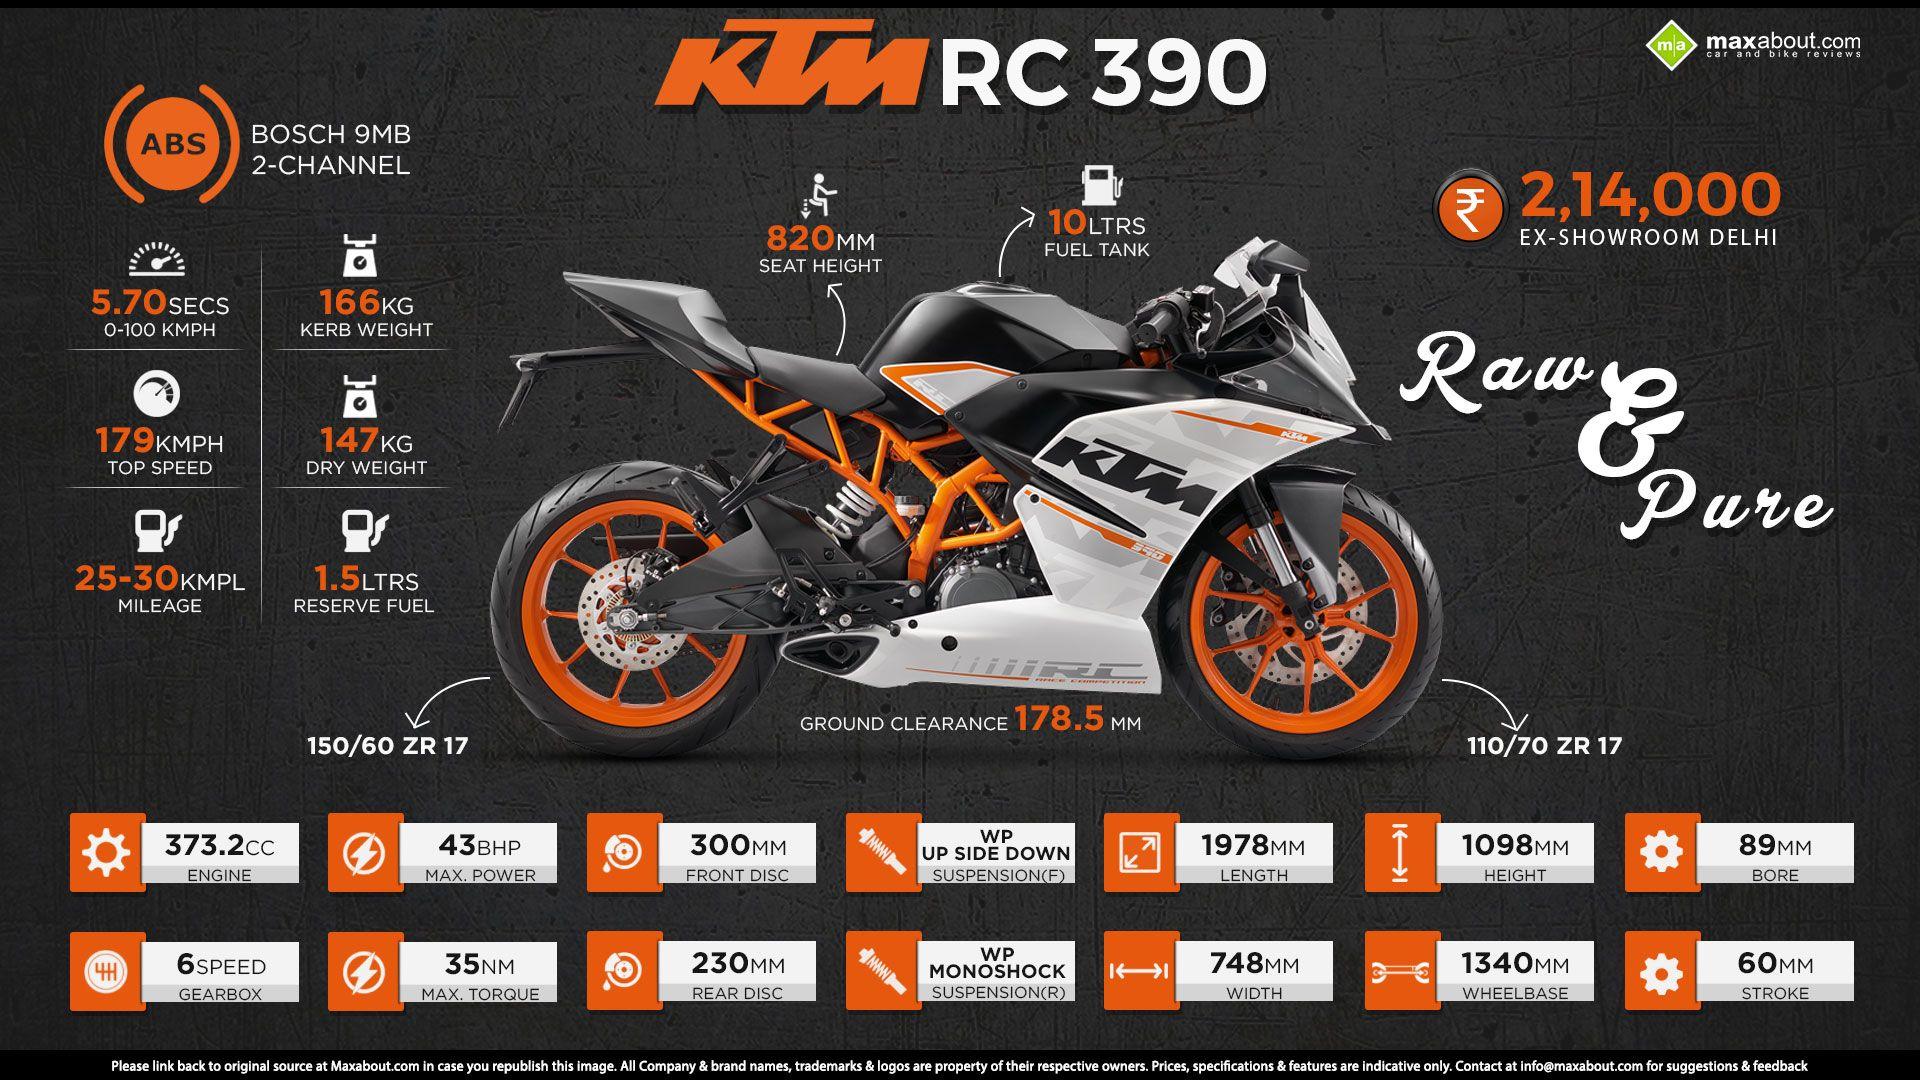 Fast Facts About KTM RC 390